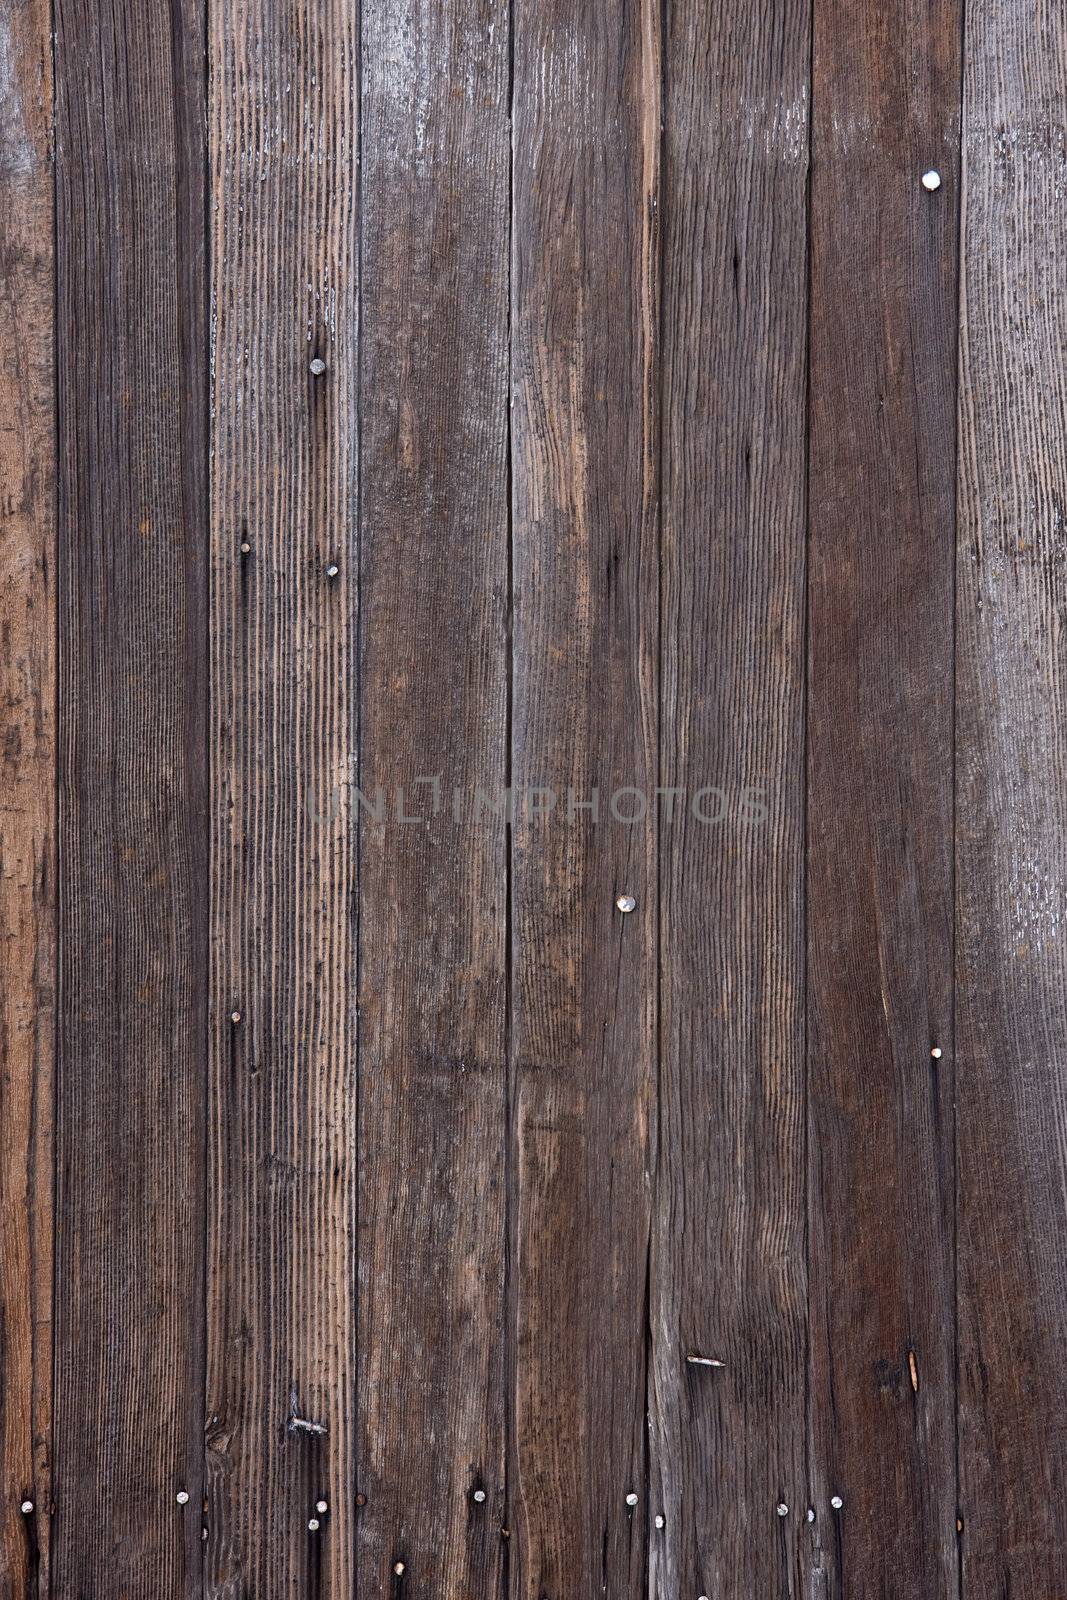 weathered wood with nails and traces of white paint by PixelsAway